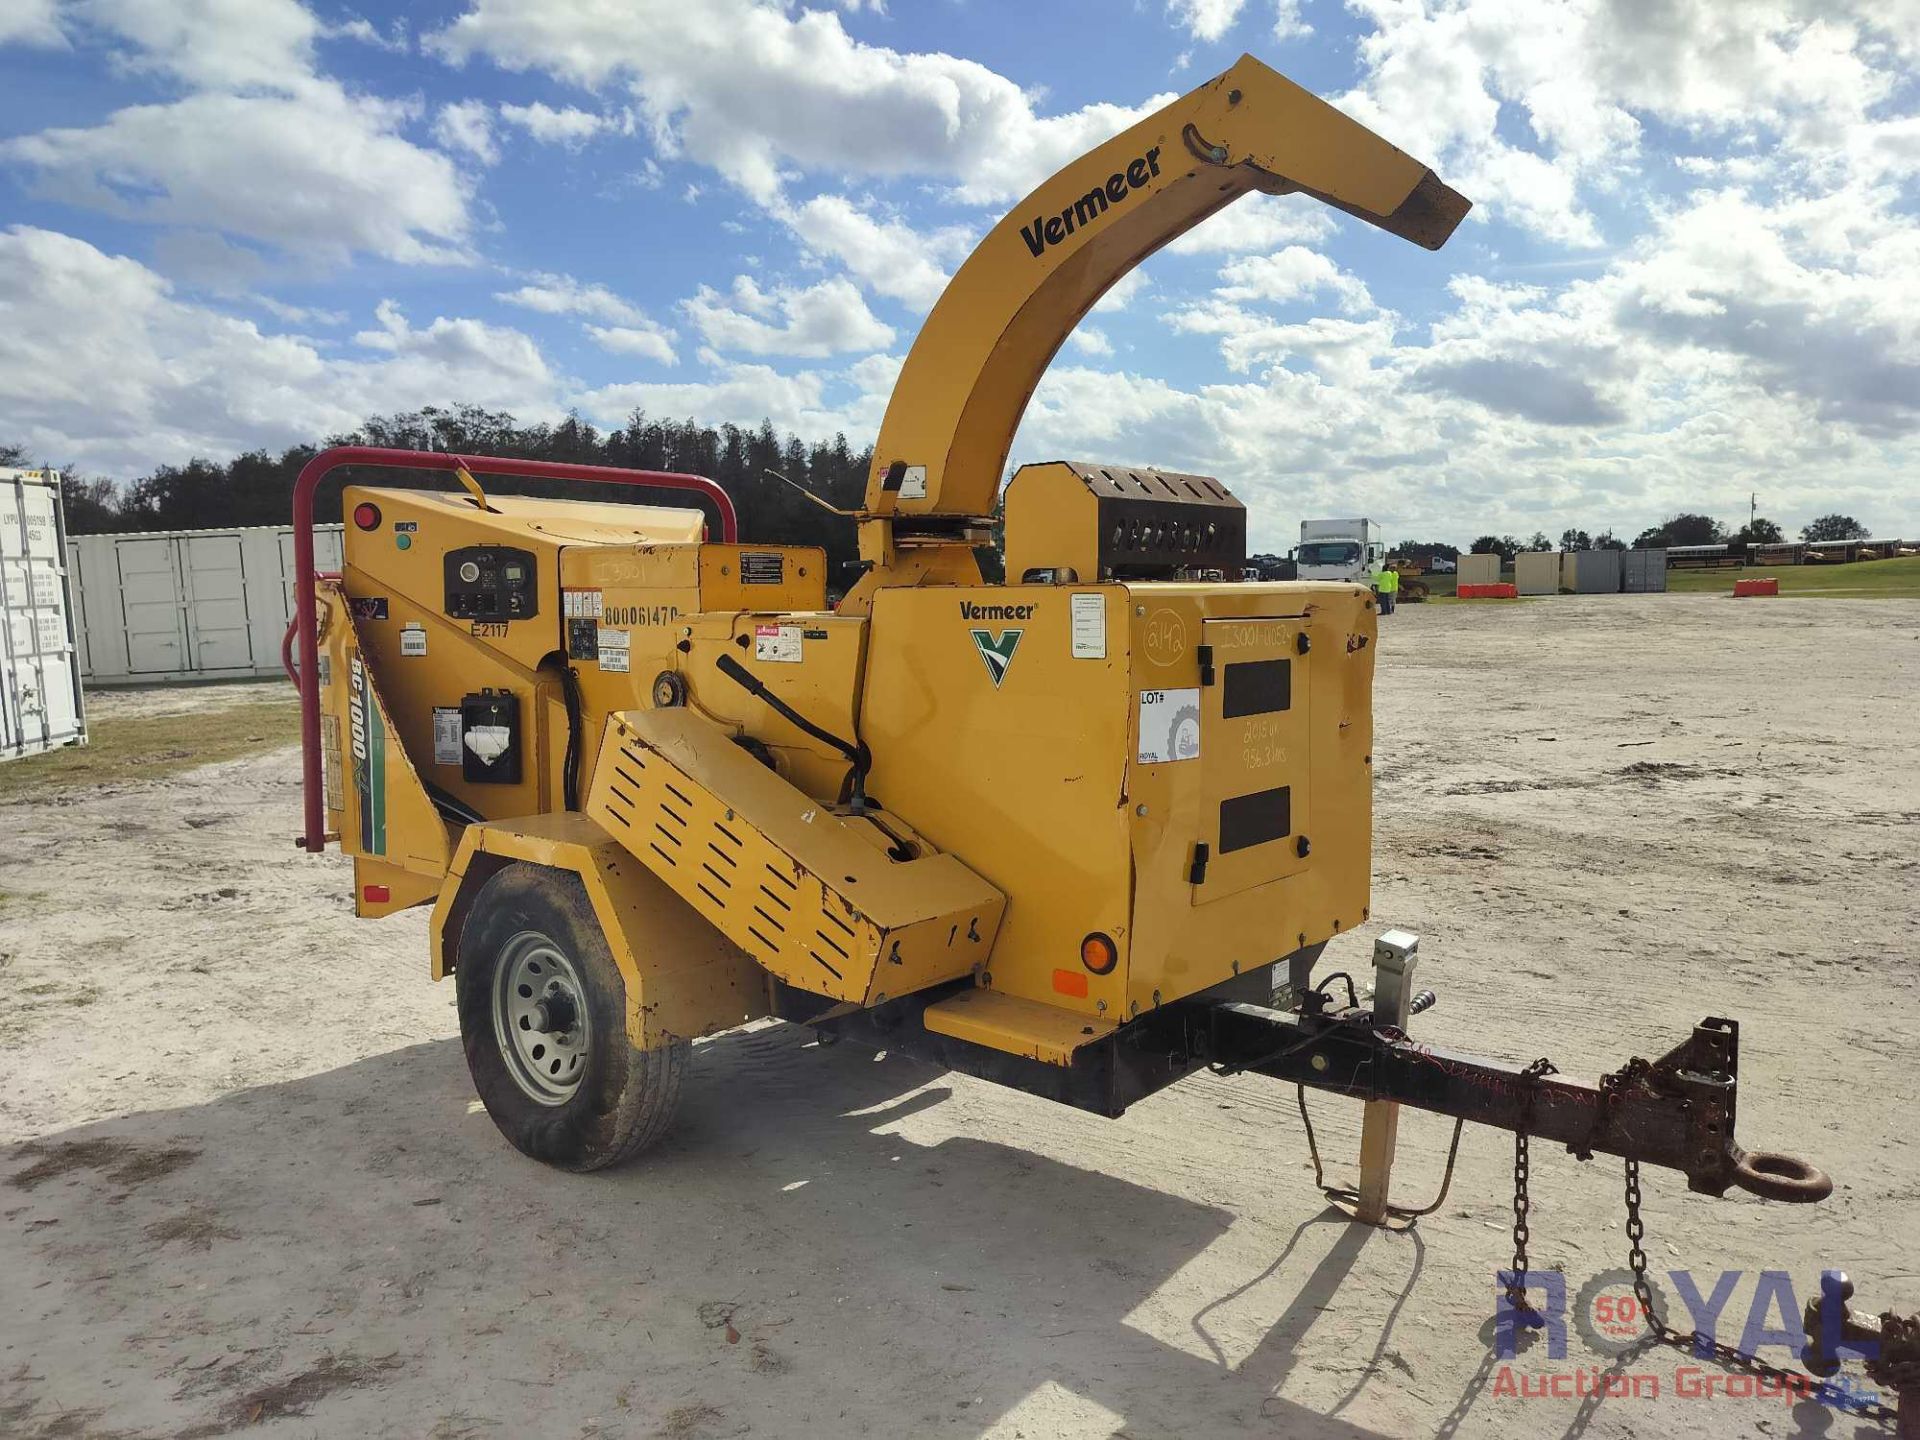 2015 Vermeer BC1000XL S/A Towable Brush Chipper - Image 2 of 17